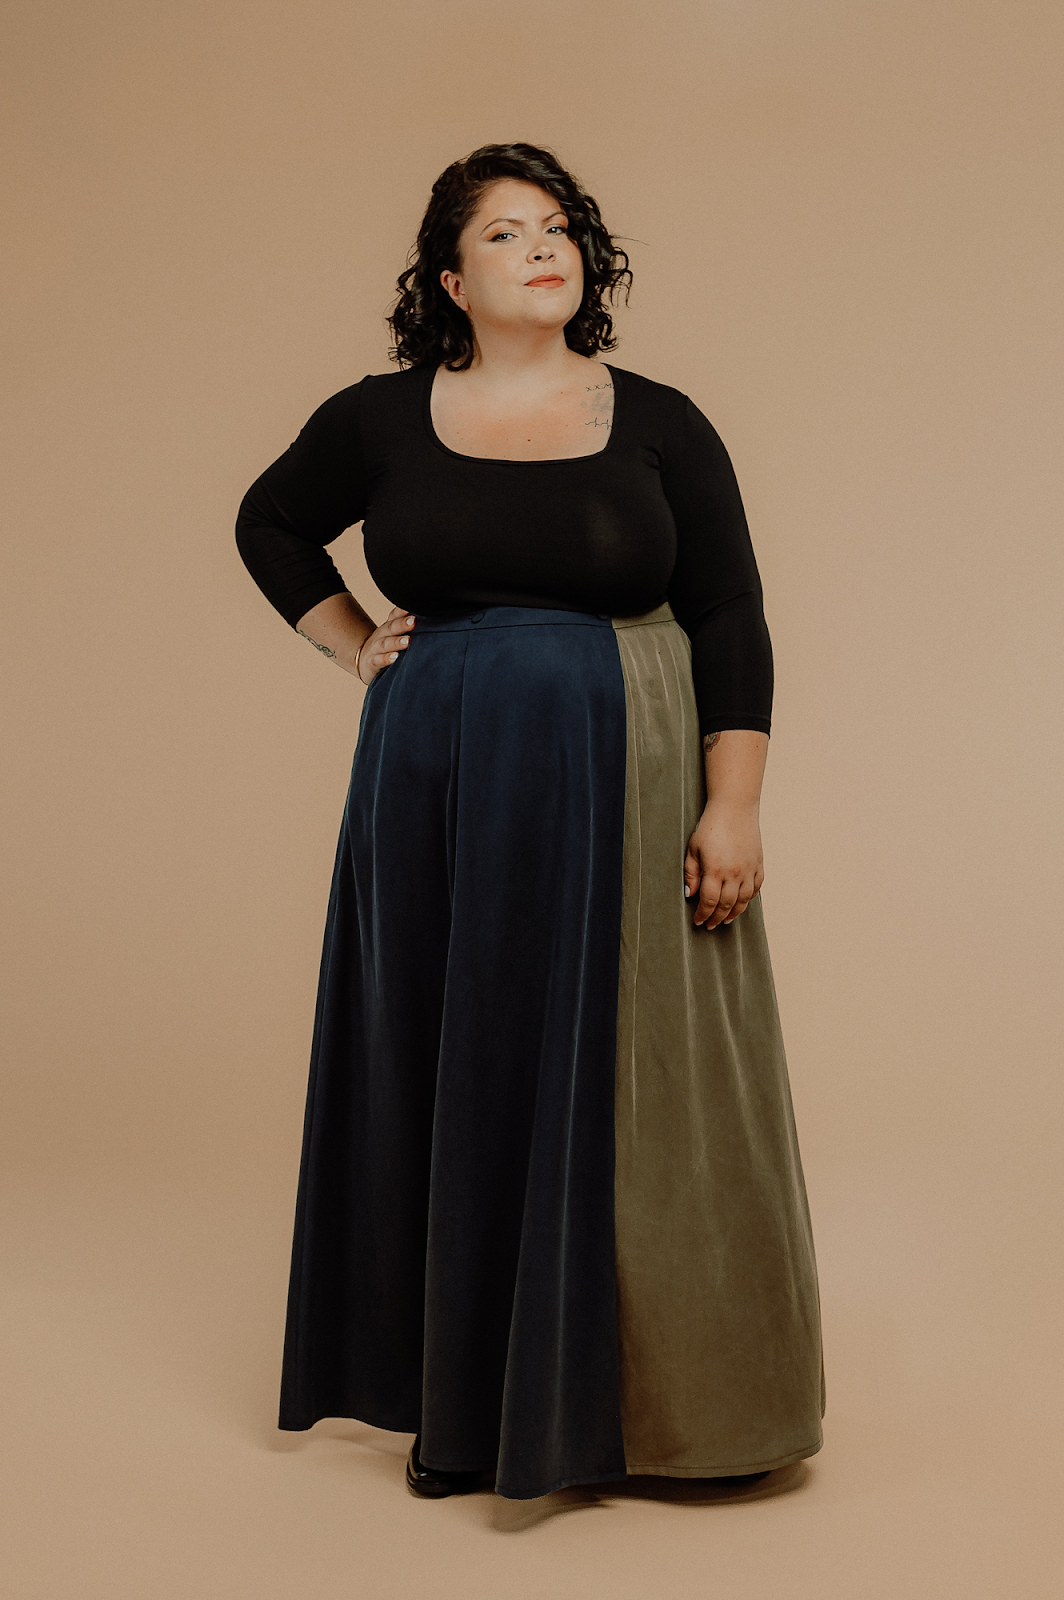 A brown person with shoulder length black hair is wearing a black 3/4 sleeve knit top with a deep squared neckline.  It is paired with a maxi skirt where the left 2/3 panel is navy and the right 1/3 panel is olive green.